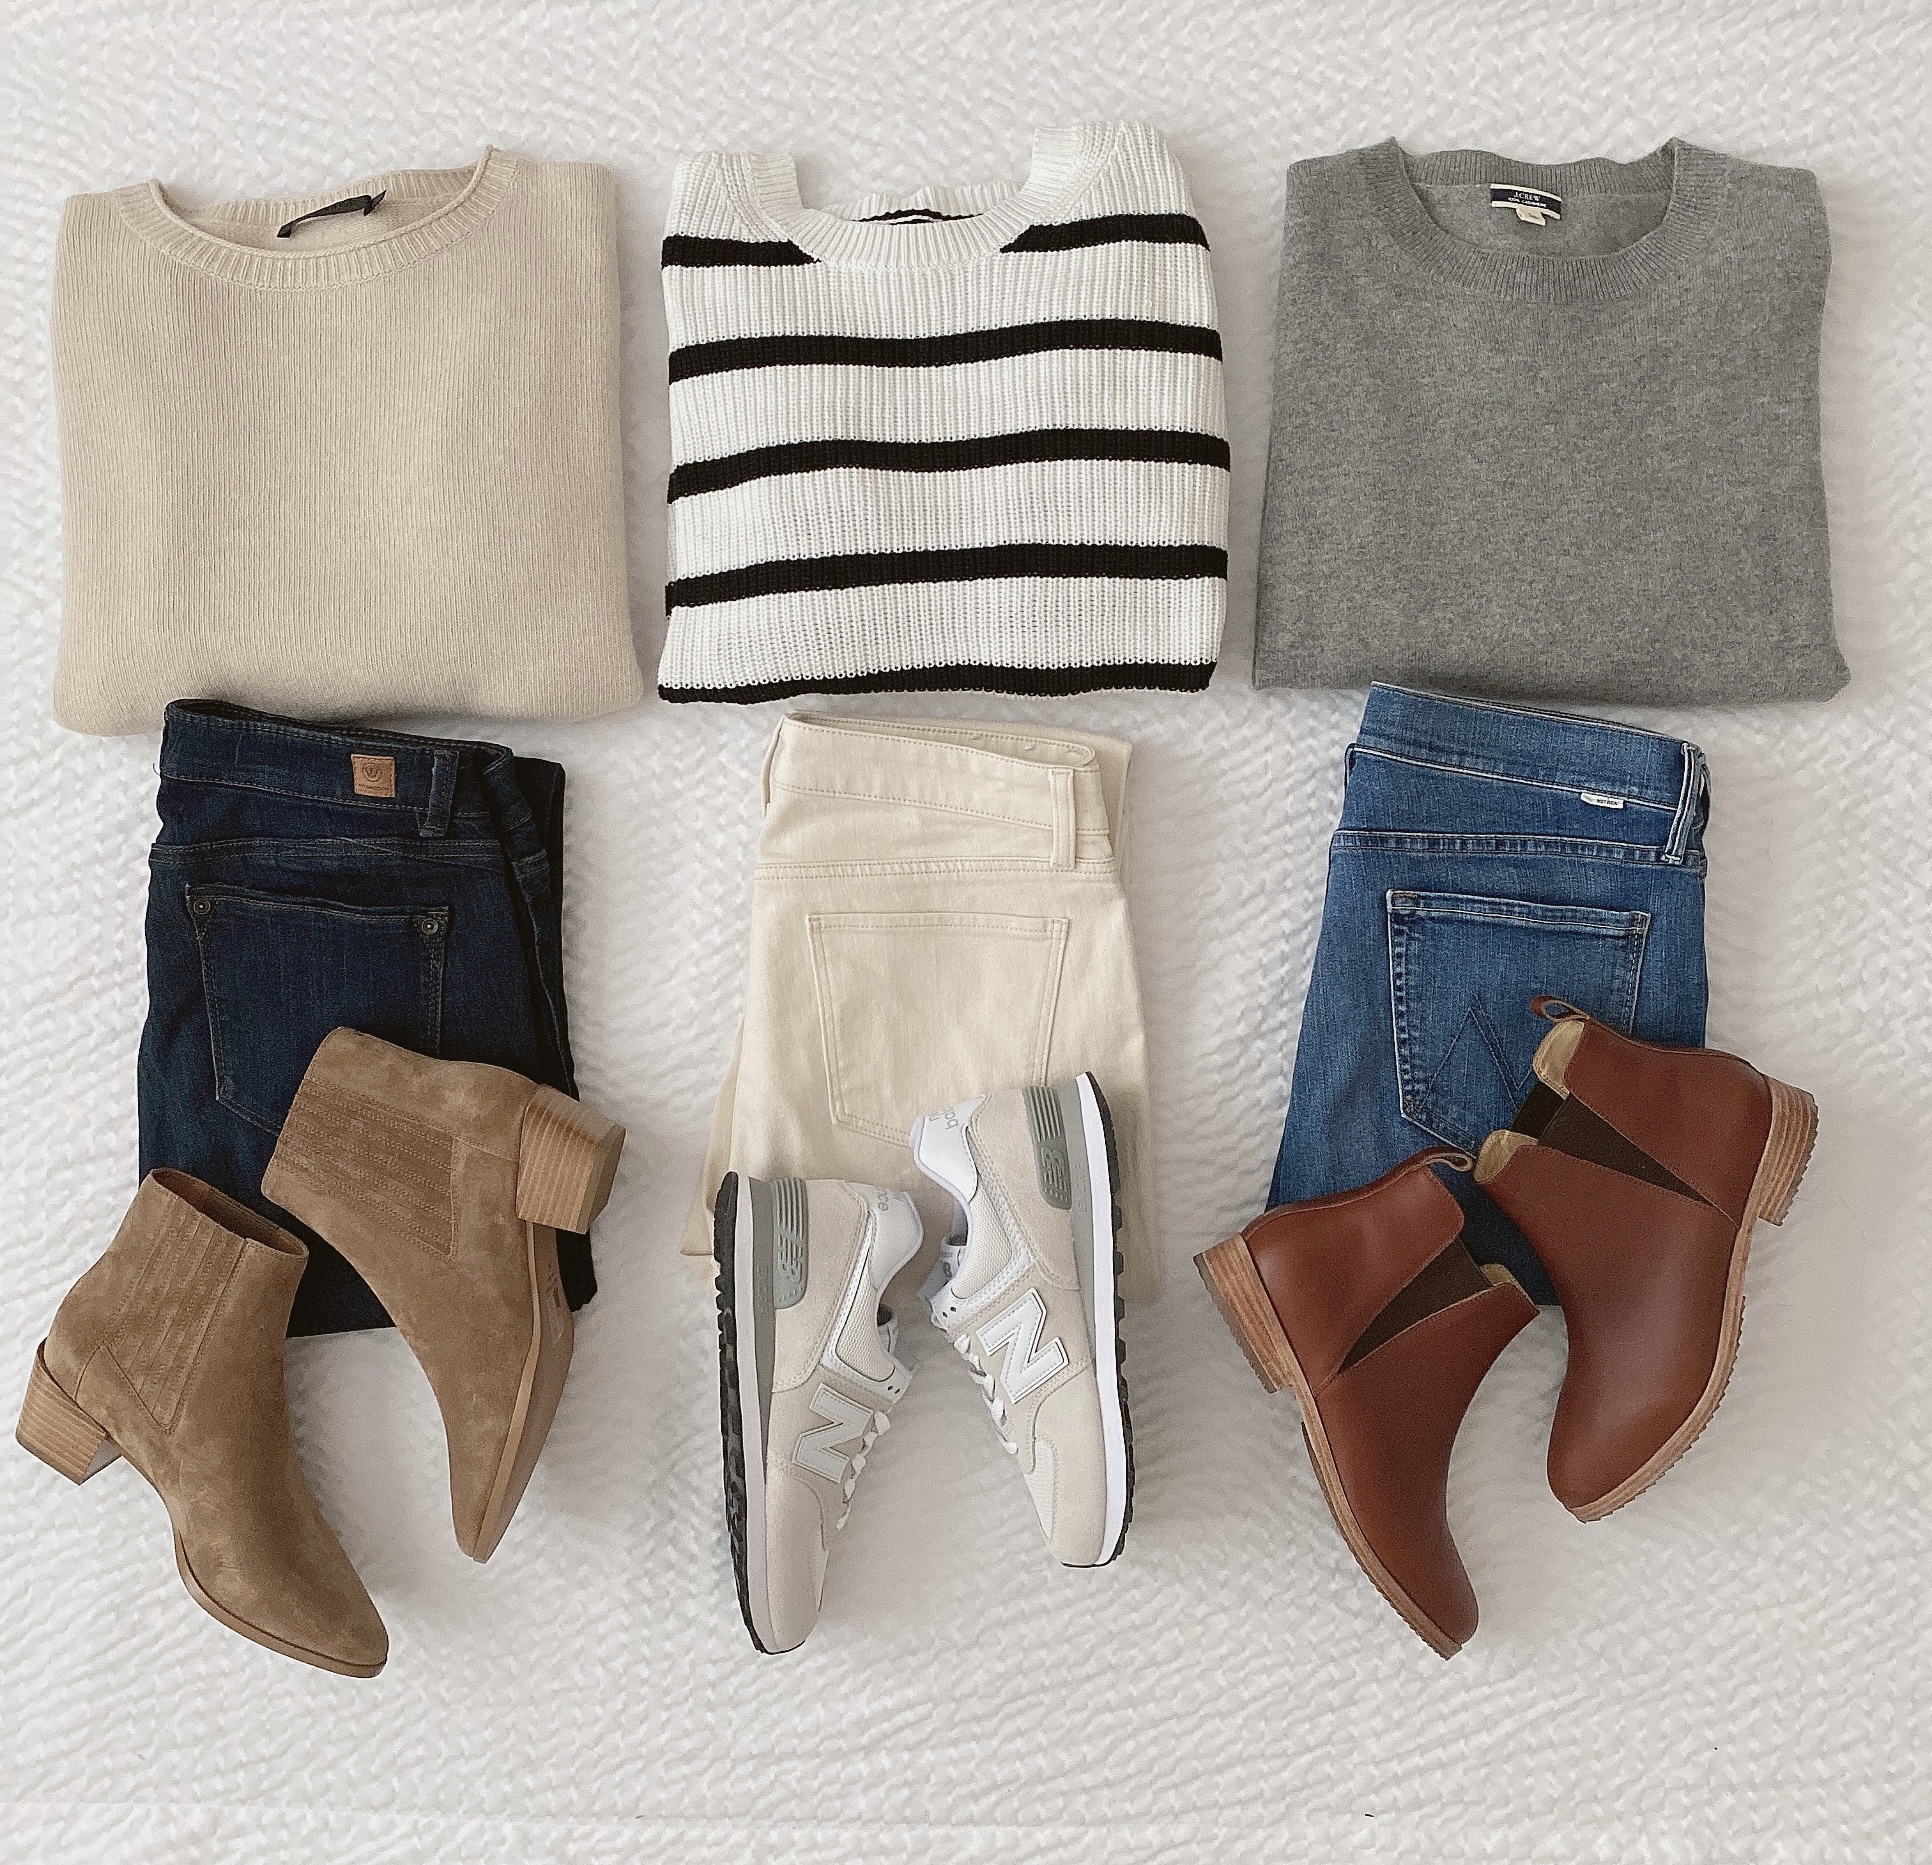 Winter Casual Mini Capsule Wardrobe: 9 Pieces = 27 Outfits - Classy Yet ...